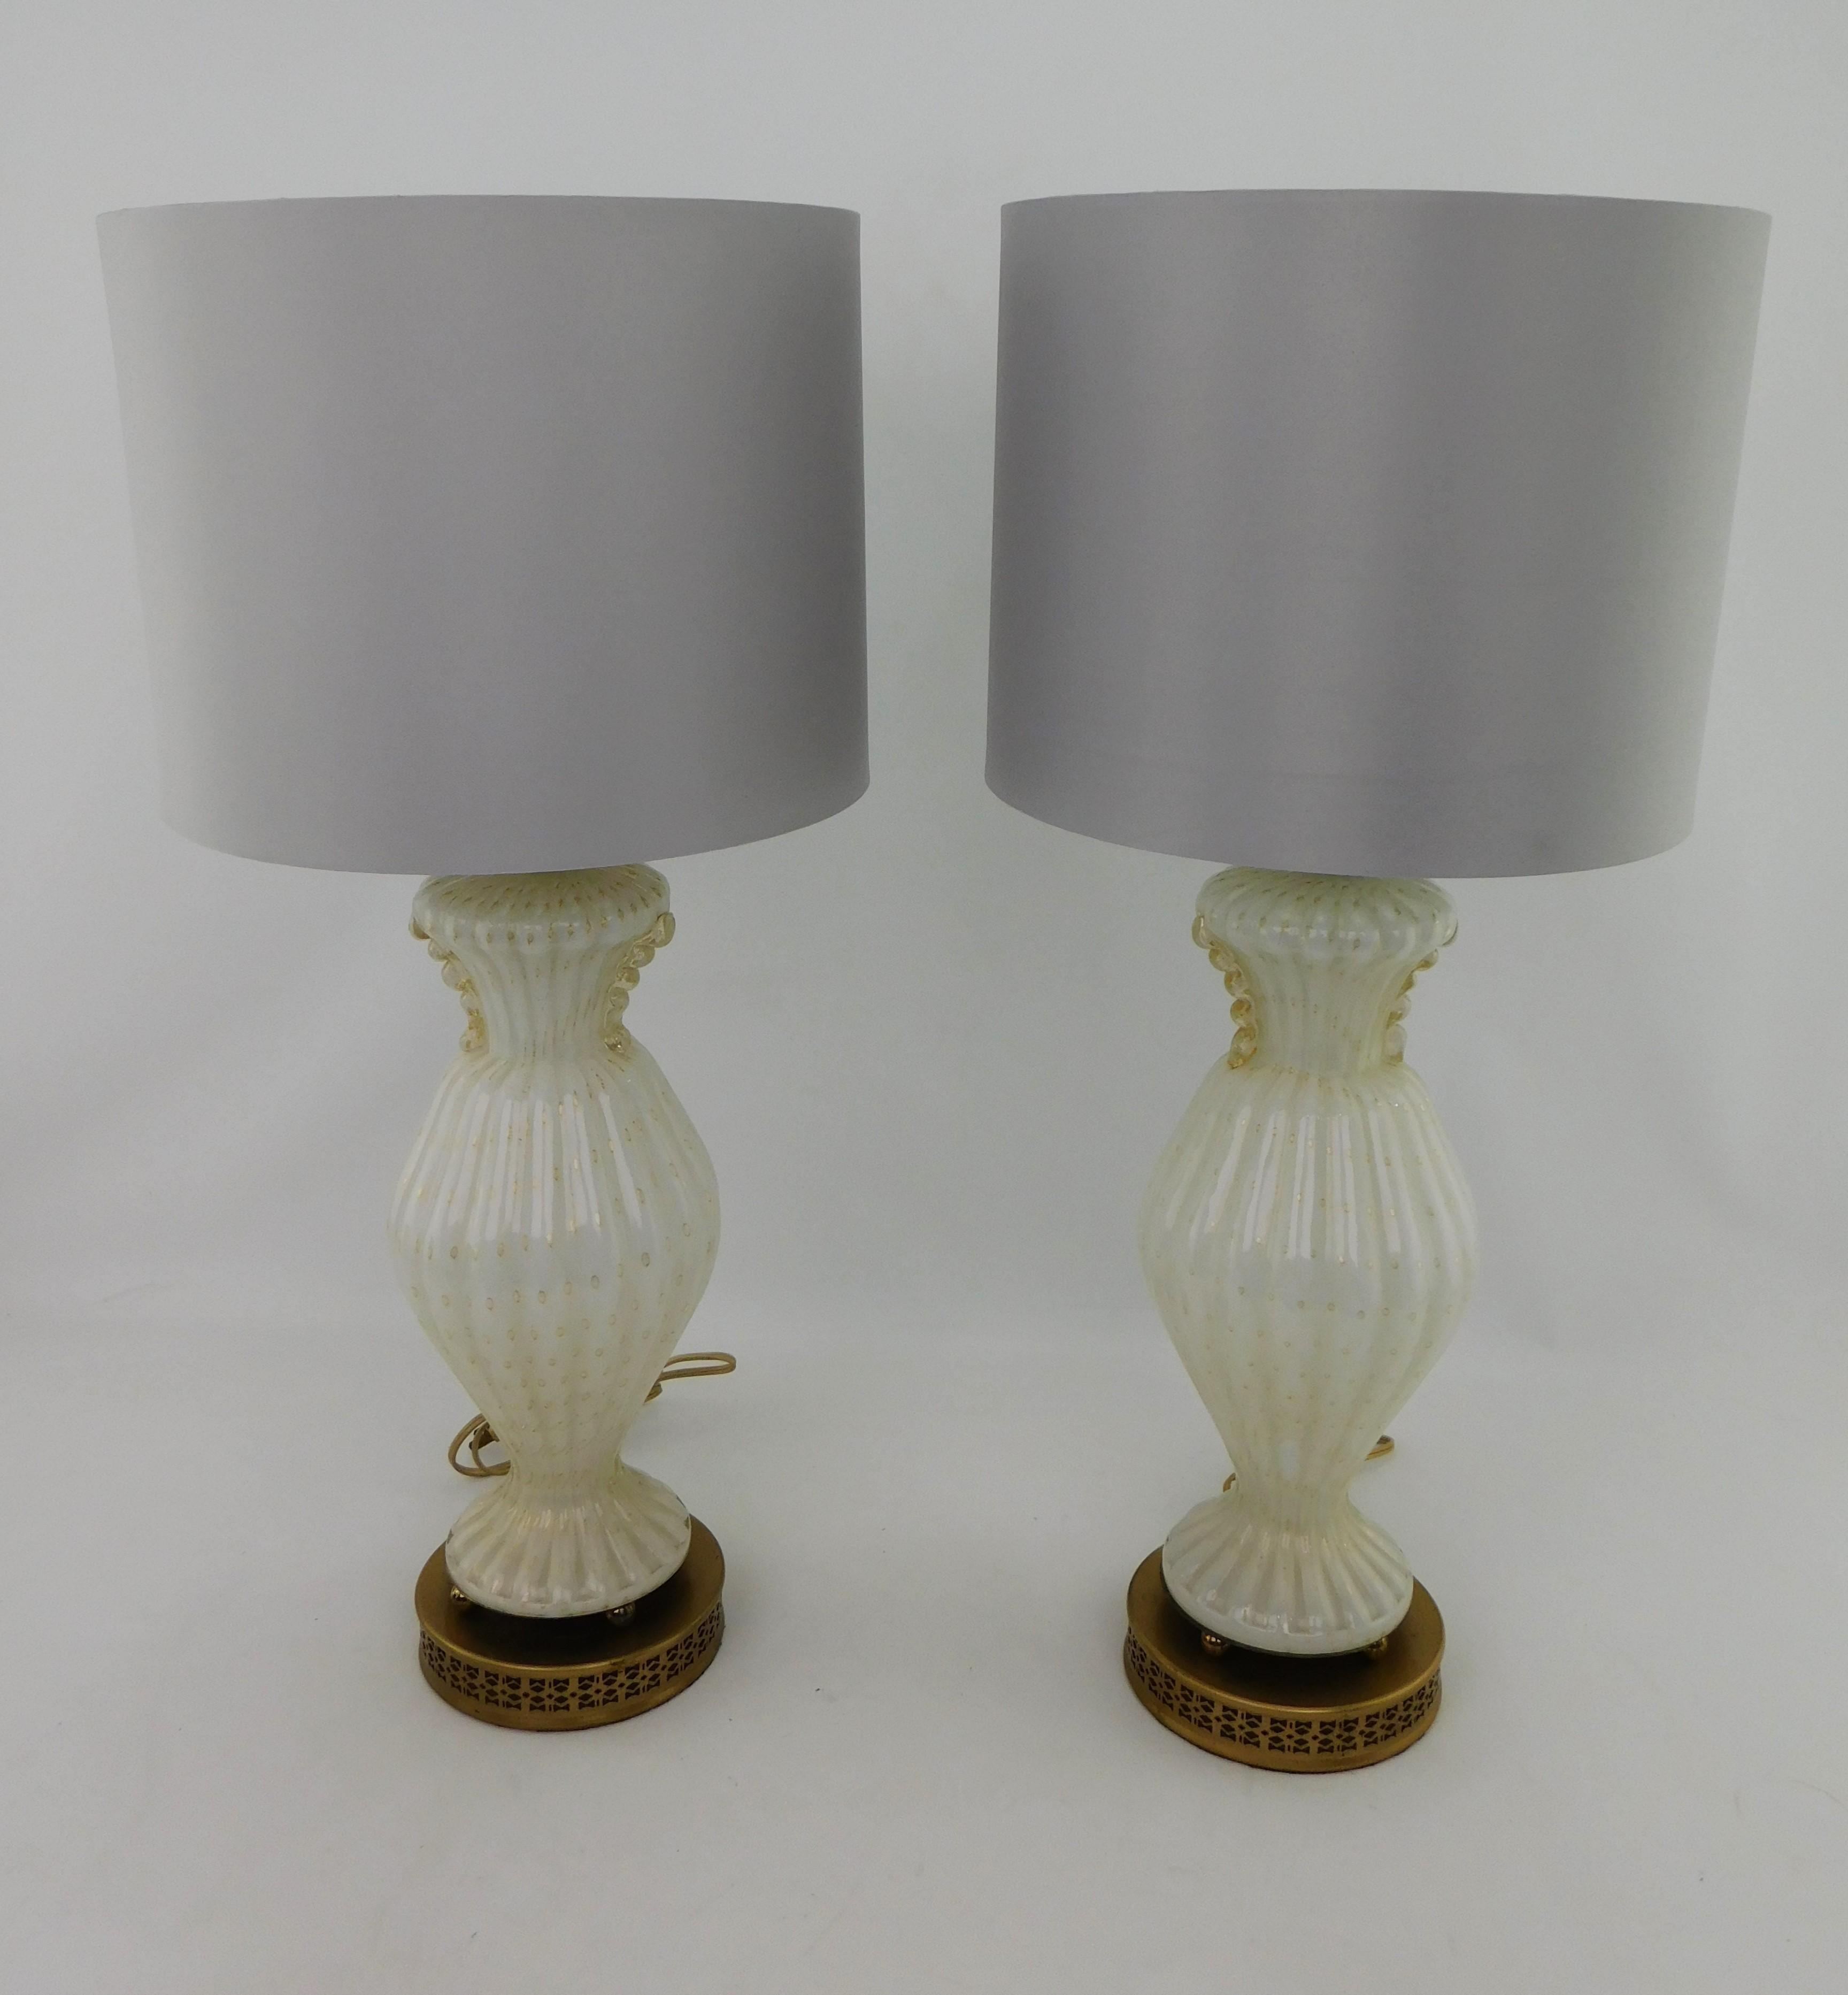 Pair of Mid-Century Modern Murano Art Glass Table Lamps with Gold Flakes For Sale 5